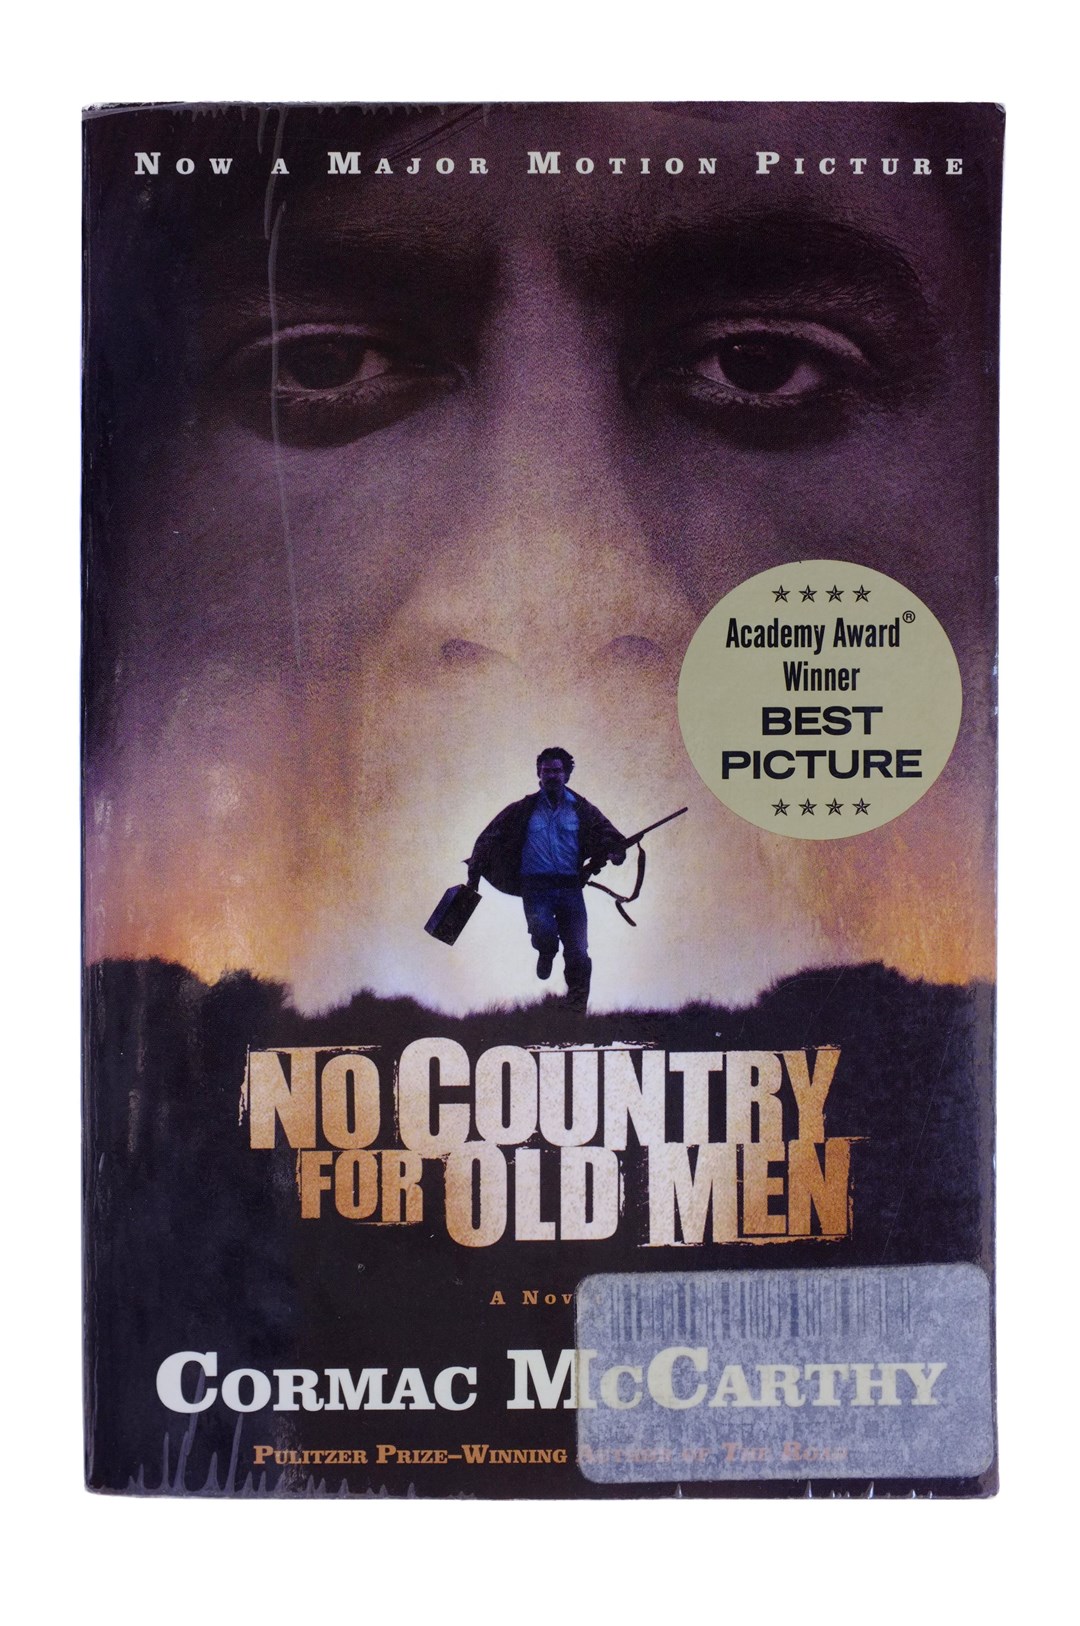 No Country For Old Men was made into an Oscar-winning film starring Javier Bardem (Alamy/PA)